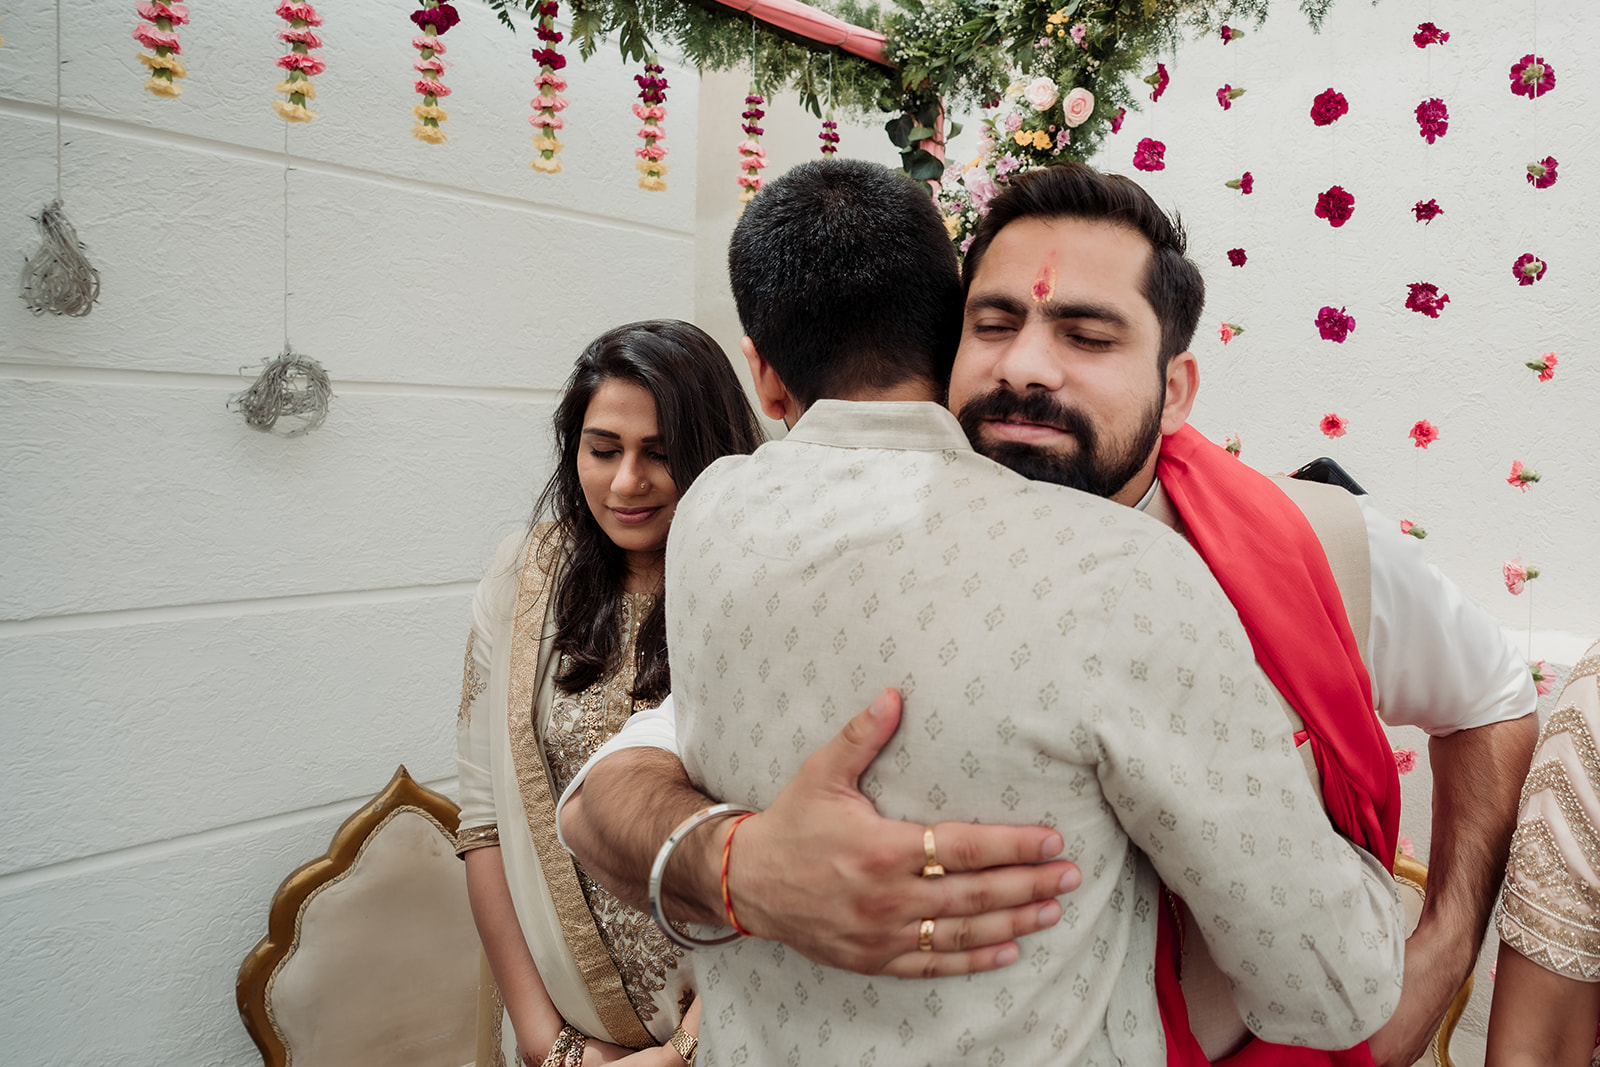 Family ties: The groom cherishes a sweet moment with his siblings, enveloped in a warm and loving hug